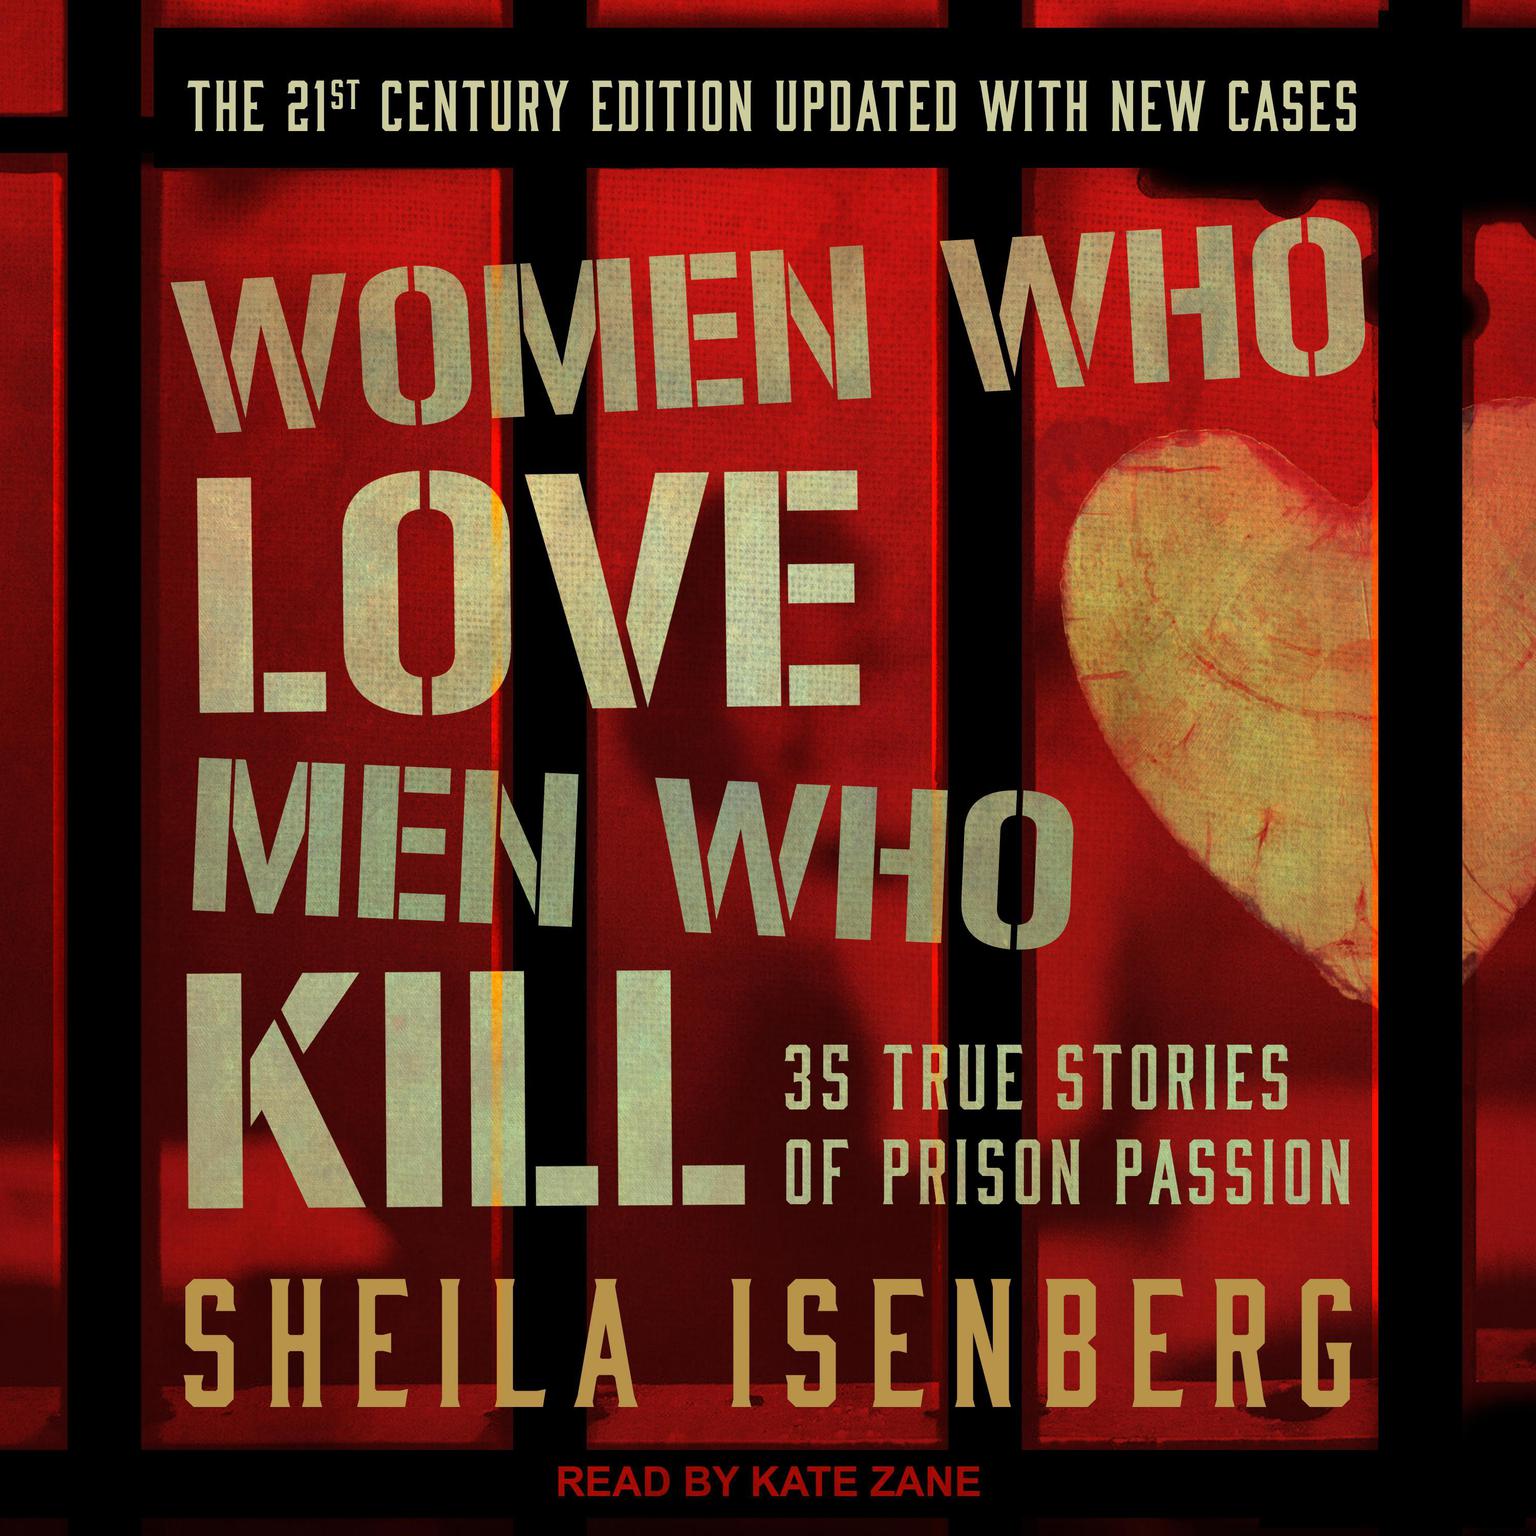 Women Who Love Men Who Kill: 35 True Stories of Prison Passion, The 21st Century Edition, Updated with New Cases Audiobook, by Sheila Isenberg